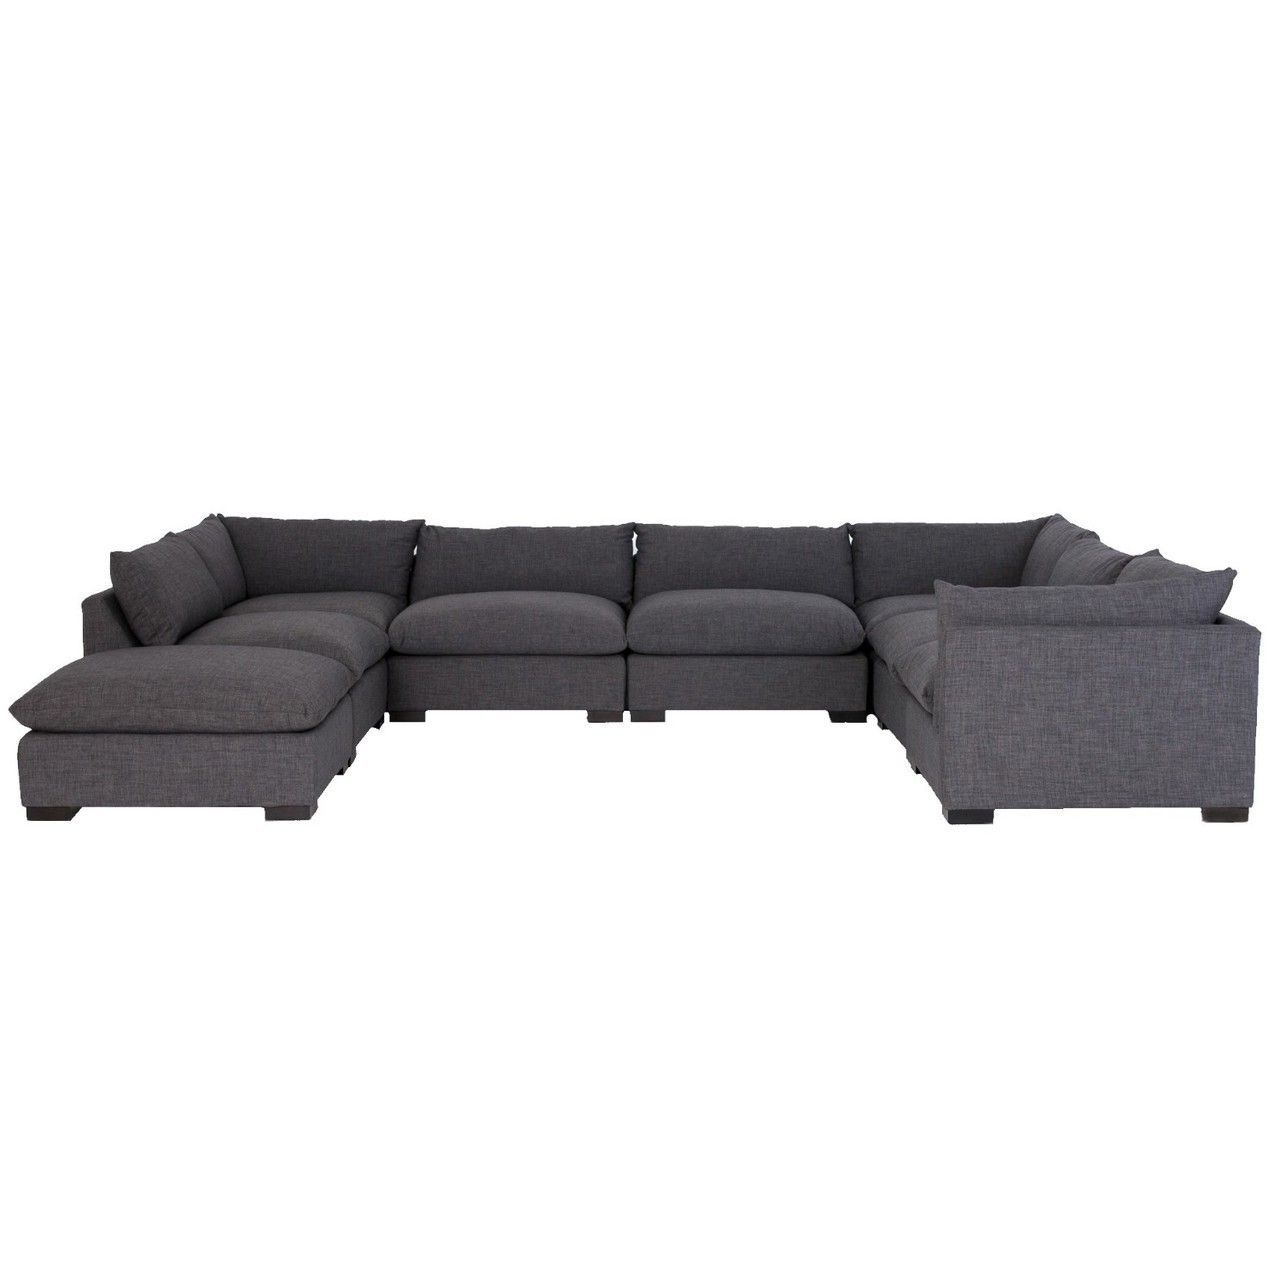 Westworld Modern Gray 8 Piece U Shape Sectional Sofa 156" | Sectional With Regard To Modern U Shape Sectional Sofas In Gray (Gallery 5 of 20)